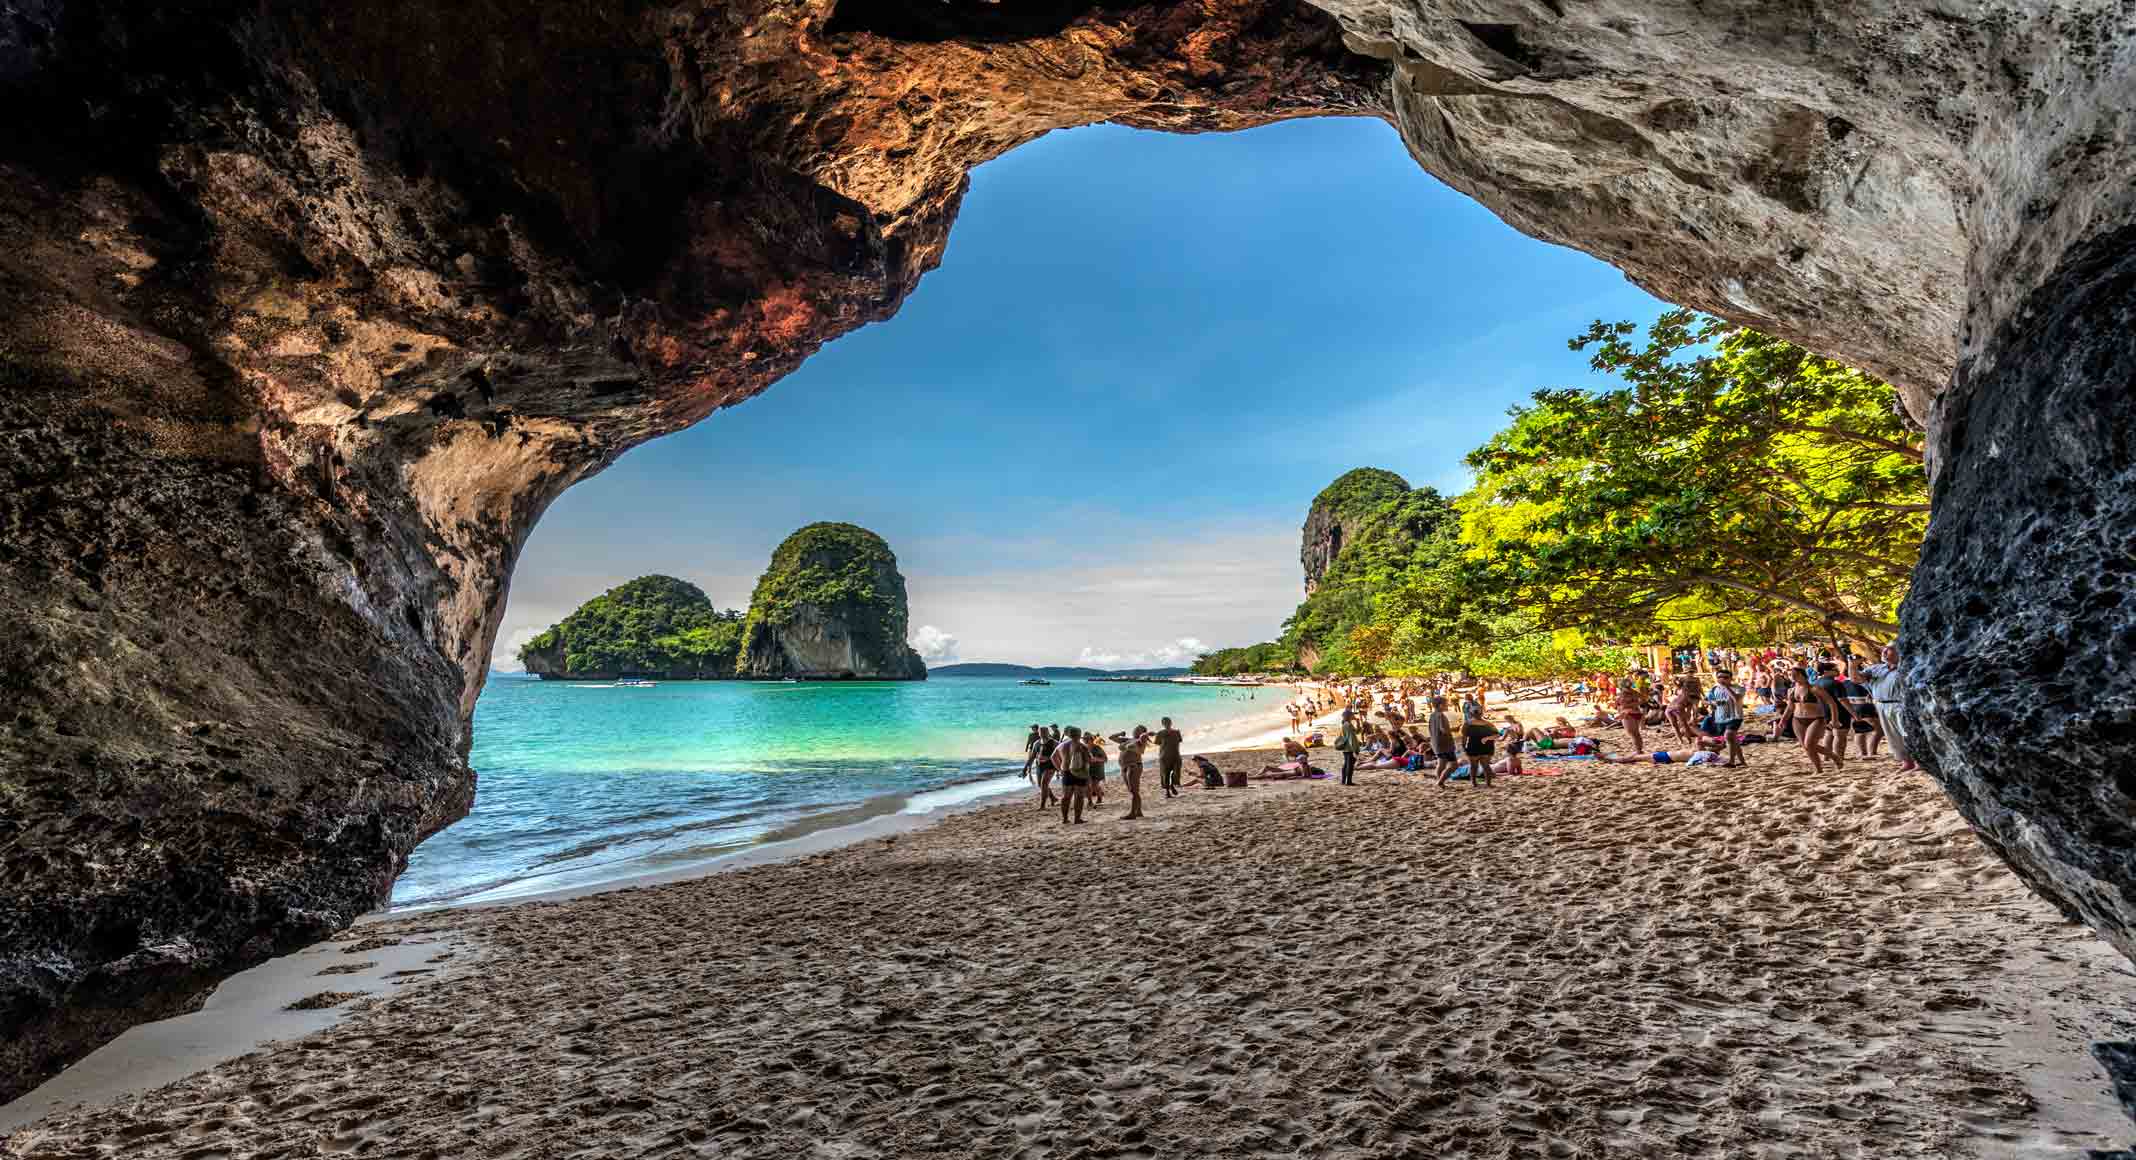 Check out: Railay, a secluded beach haven in Krabi for adventure